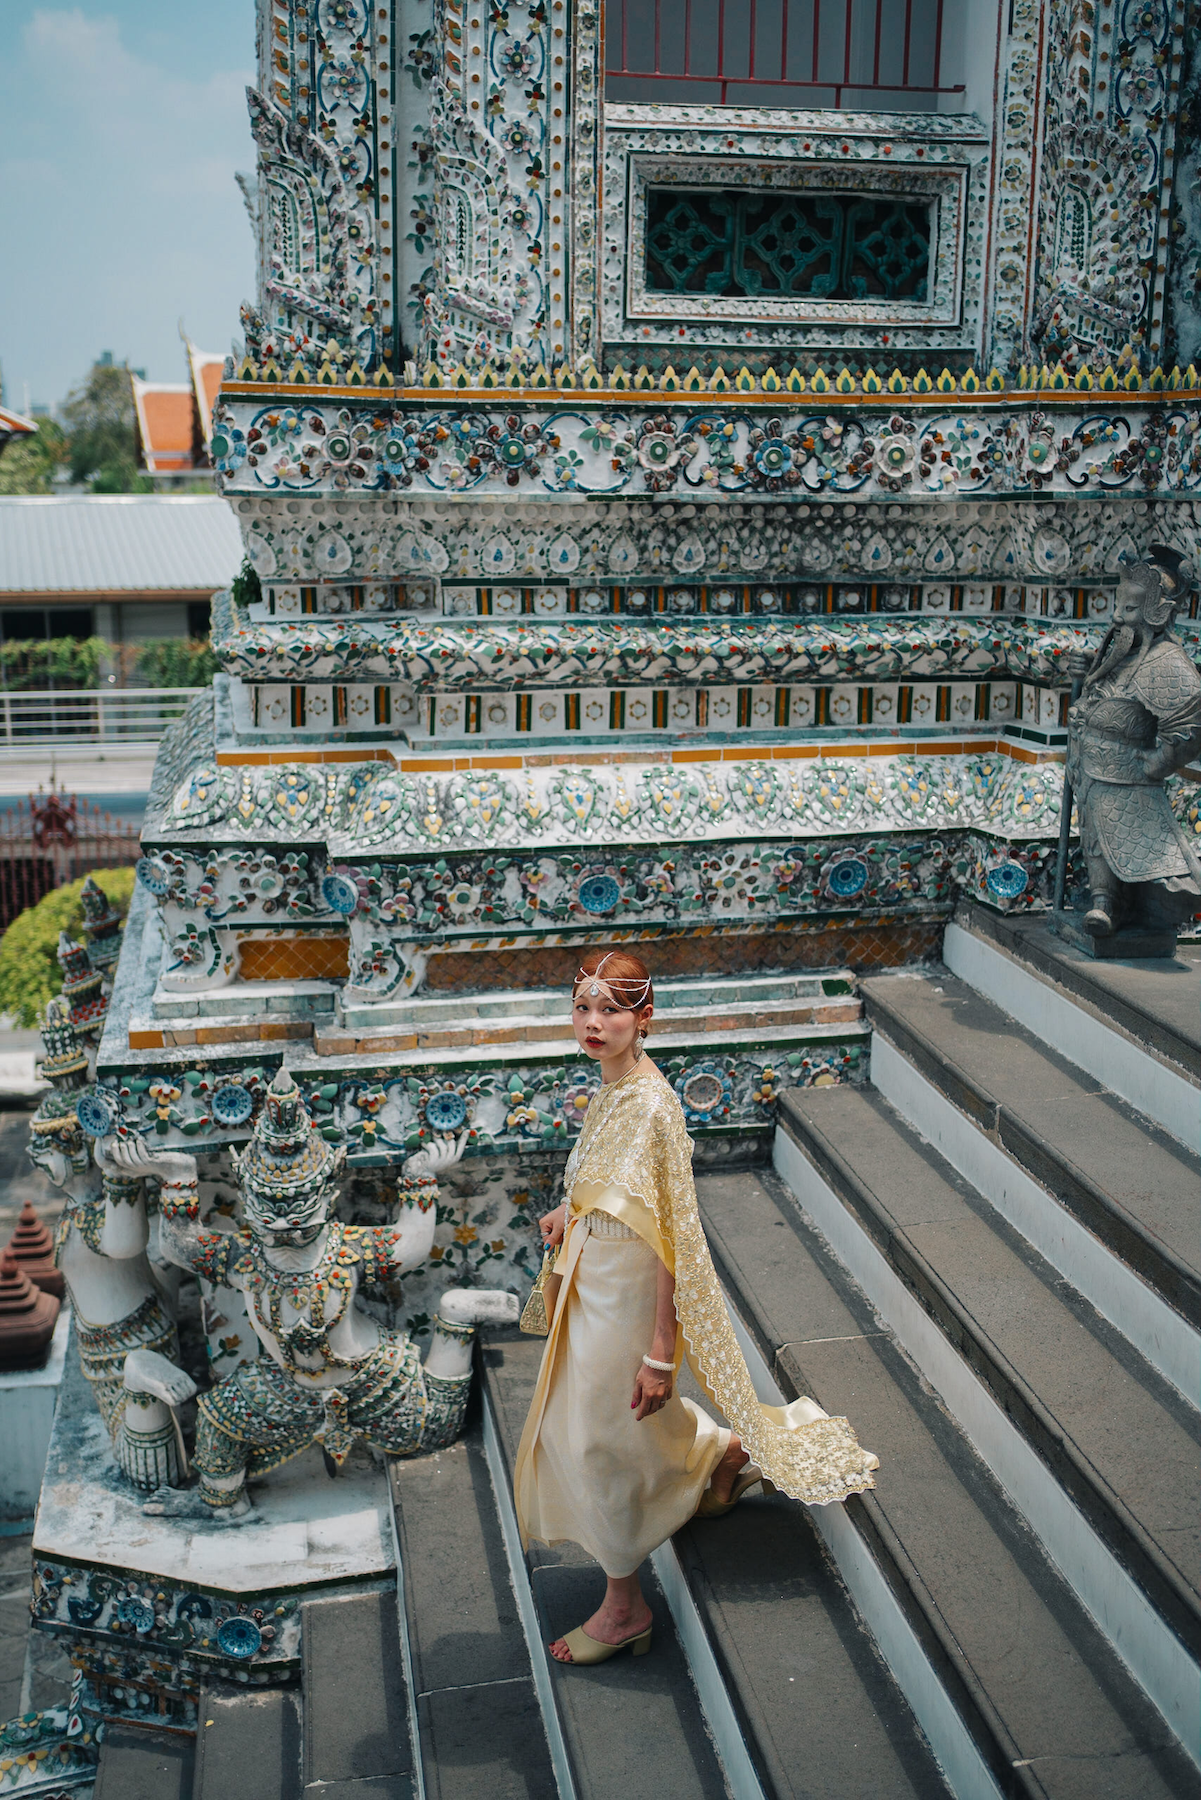 Woman in a traditional Thai outfit walking down the stairs and looking sideways, with the Wat Arun Temple in the background